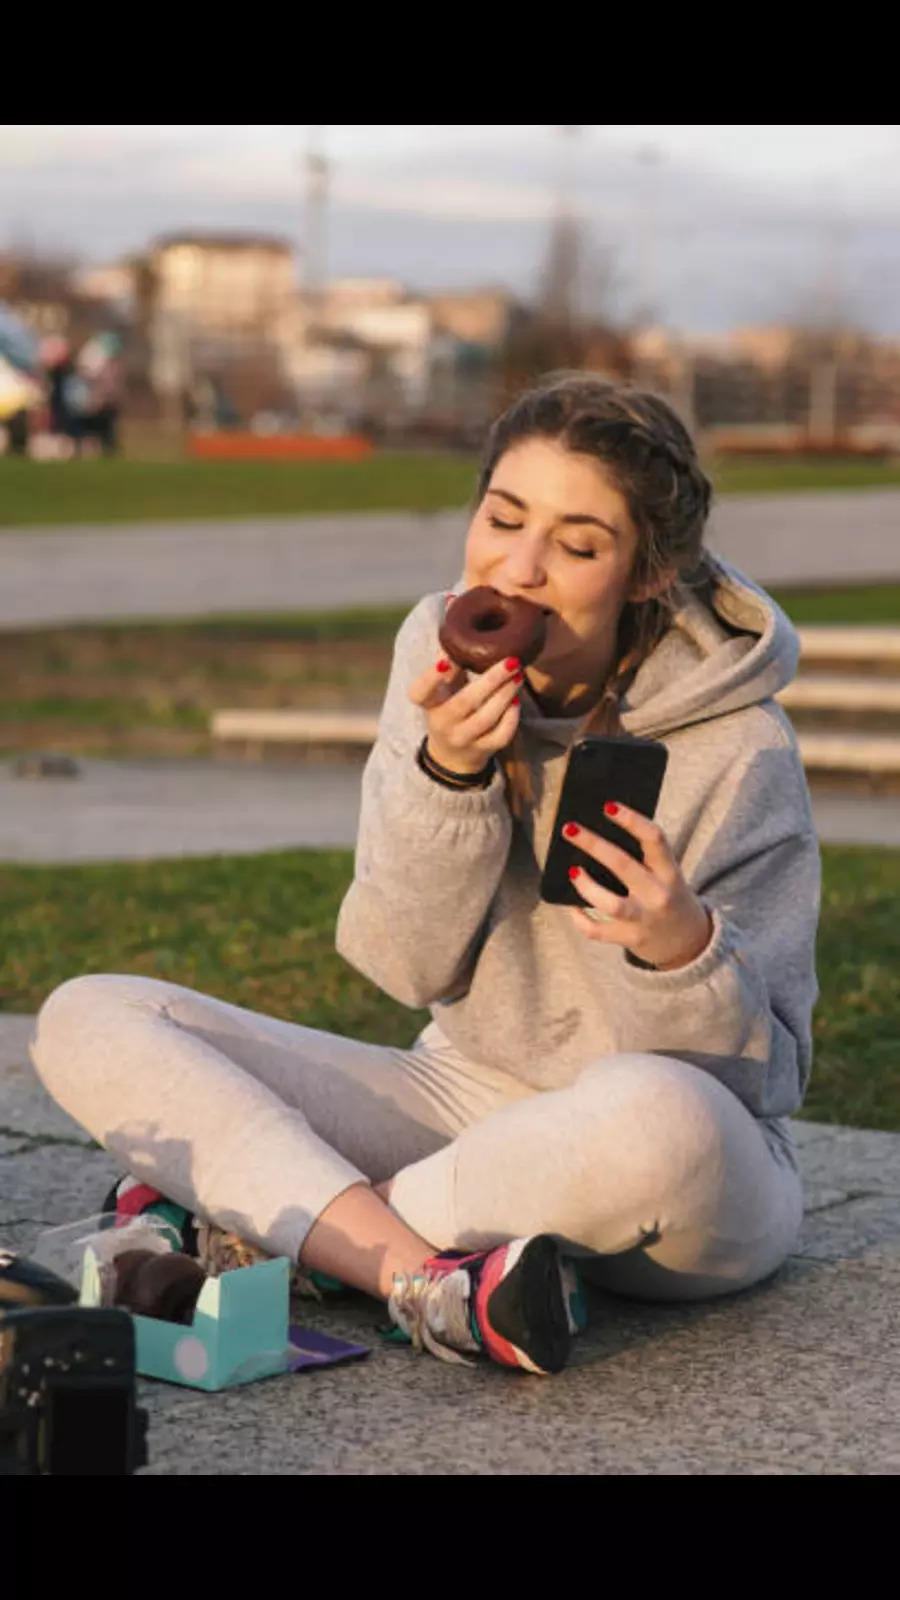 Ways to control stress eating